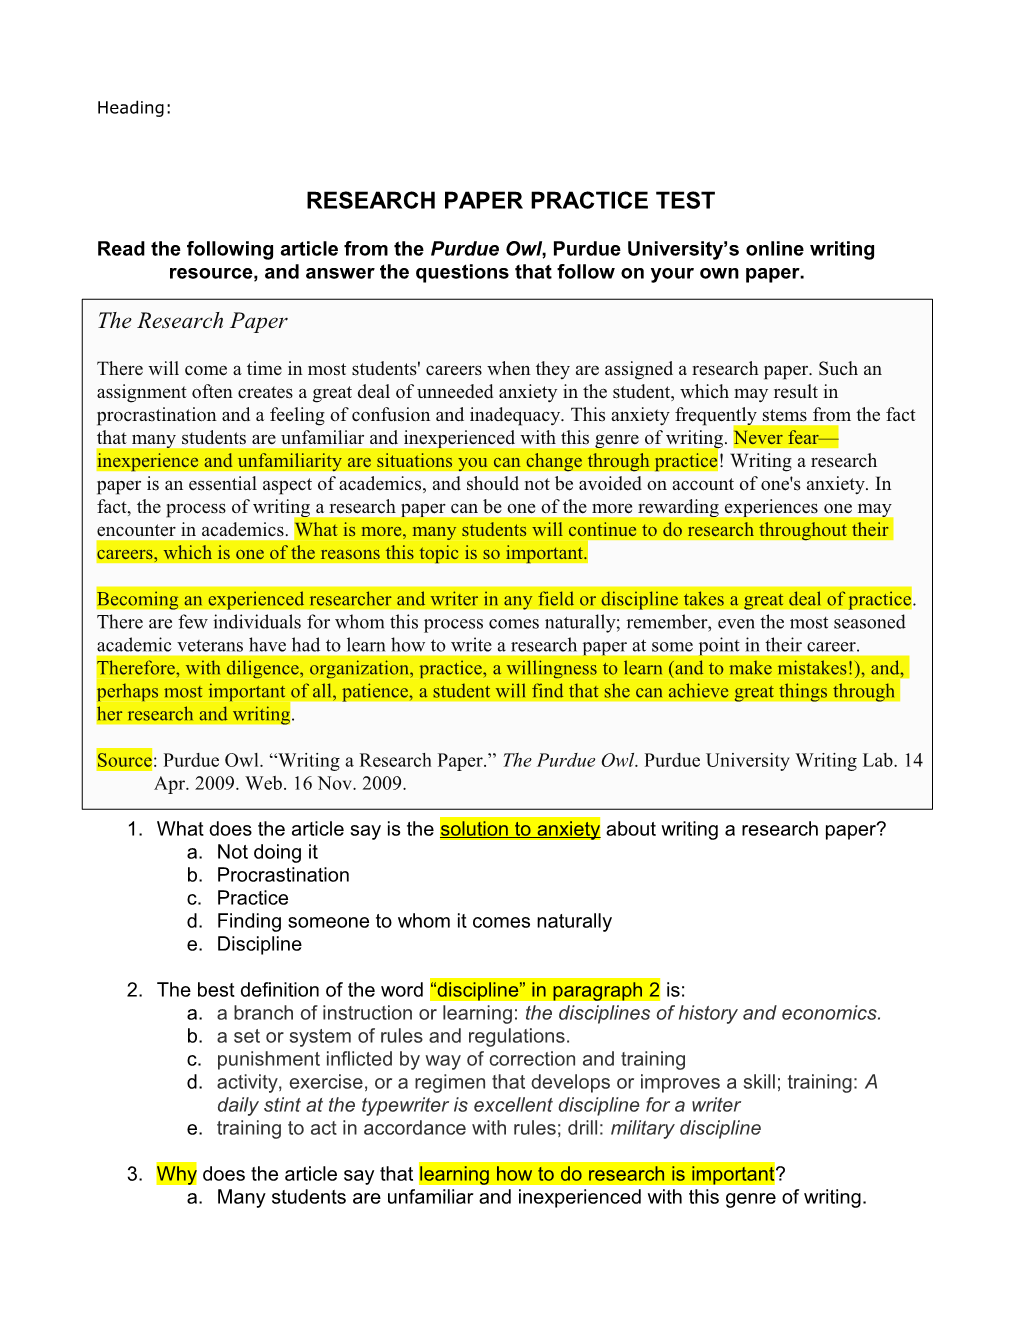 Research Paper Practice Test